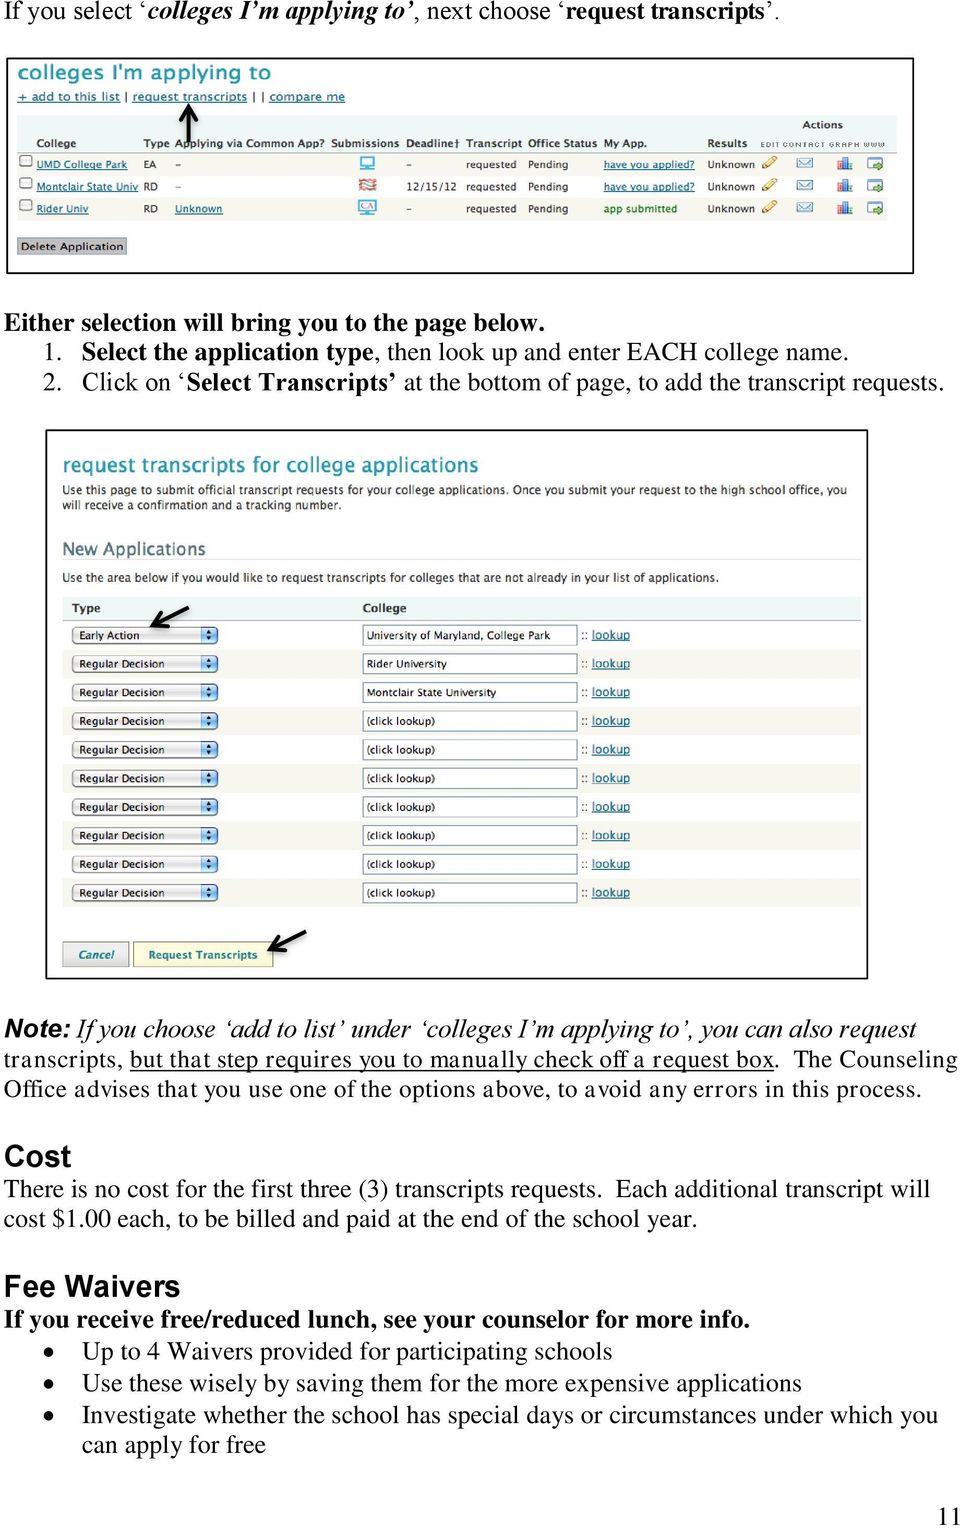 Note: If you choose add to list under colleges I m applying to, you can also request transcripts, but that step requires you to manually check off a request box.